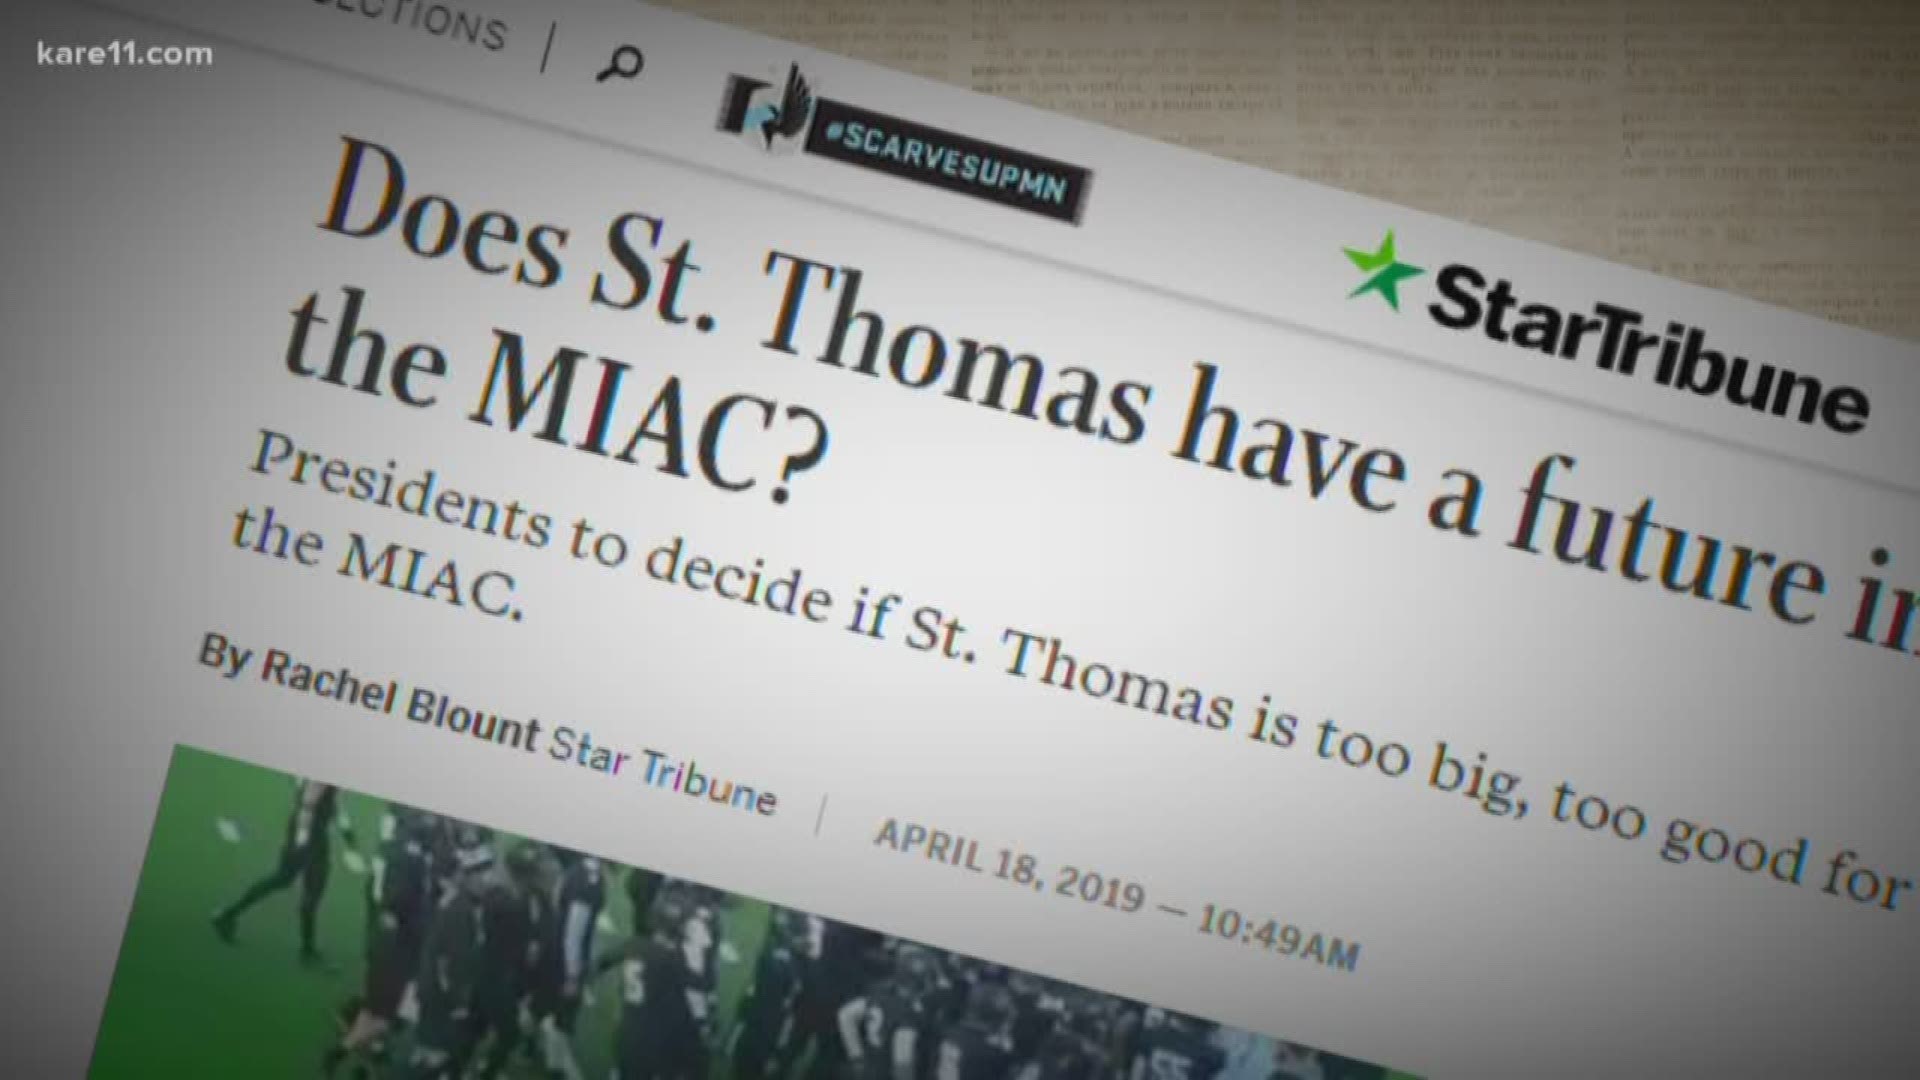 Sources have told the Star Tribune for weeks that some in the MIAC are plotting to find a way to get rid of a founding member: the University of St. Thomas. But why? https://kare11.tv/2UntFn7